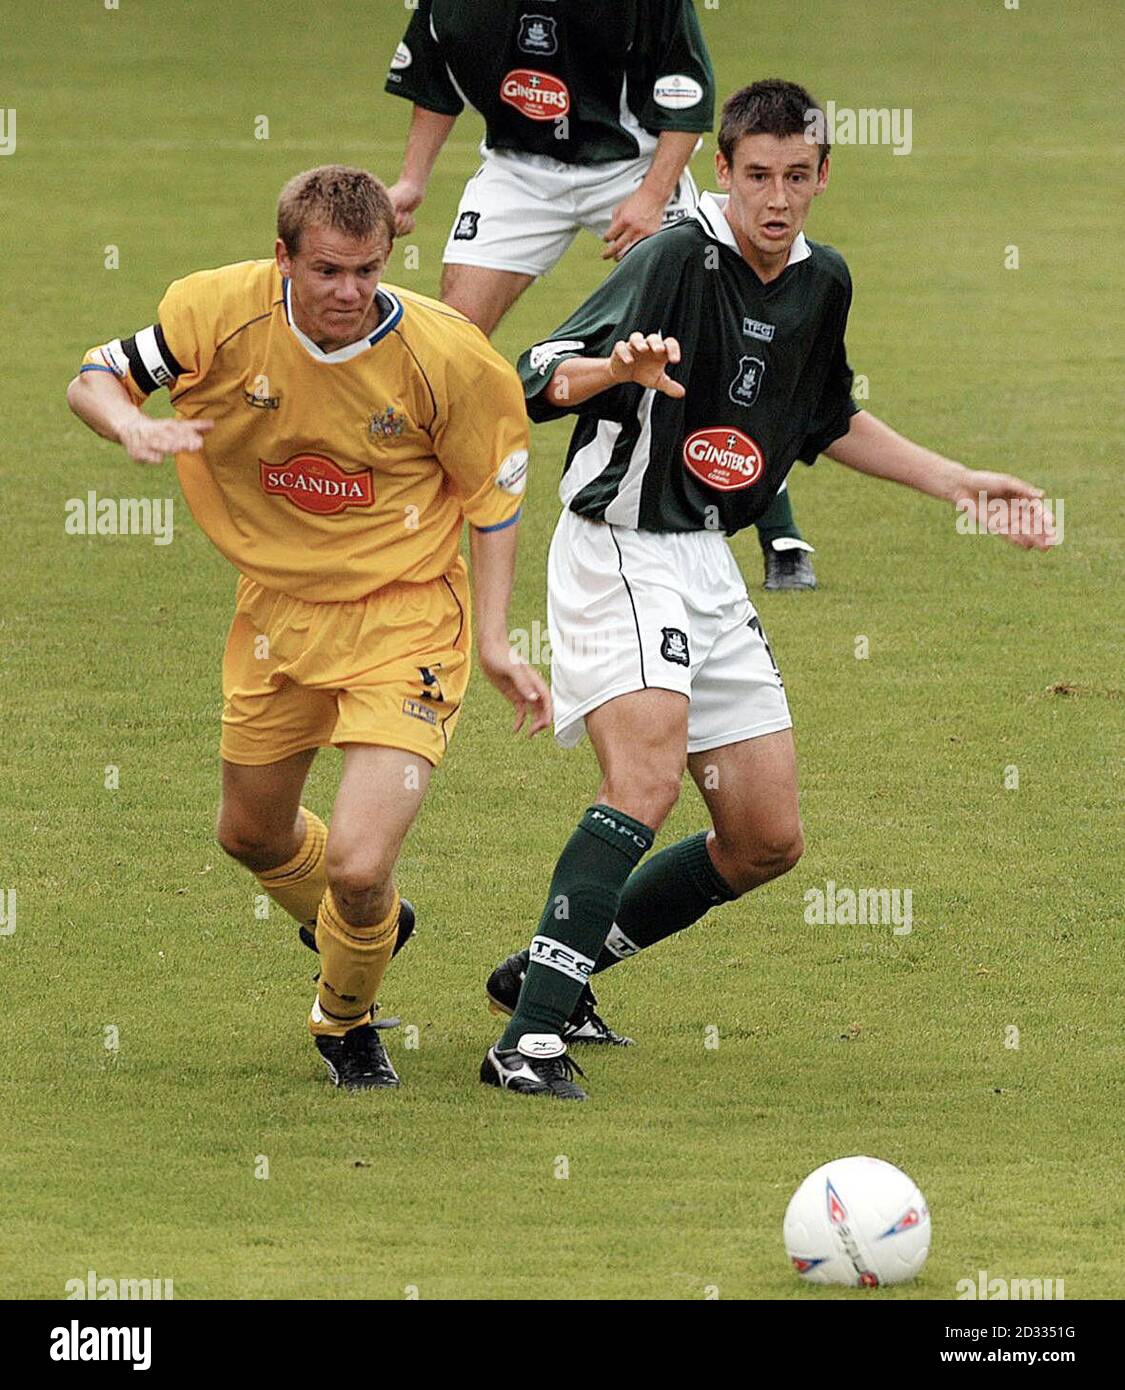 Stockport County's Robert Clare in action against Plymouth Argyle's Ian Stonebridge (right) during their Nationwide Division Two match at Plymouth's Home Park ground. THIS PICTURE CAN ONLY BE USED WITHIN THE CONTEXT OF AN EDITORIAL FEATURE. NO UNOFFICIAL CLUB WEBSITE USE. Stock Photo